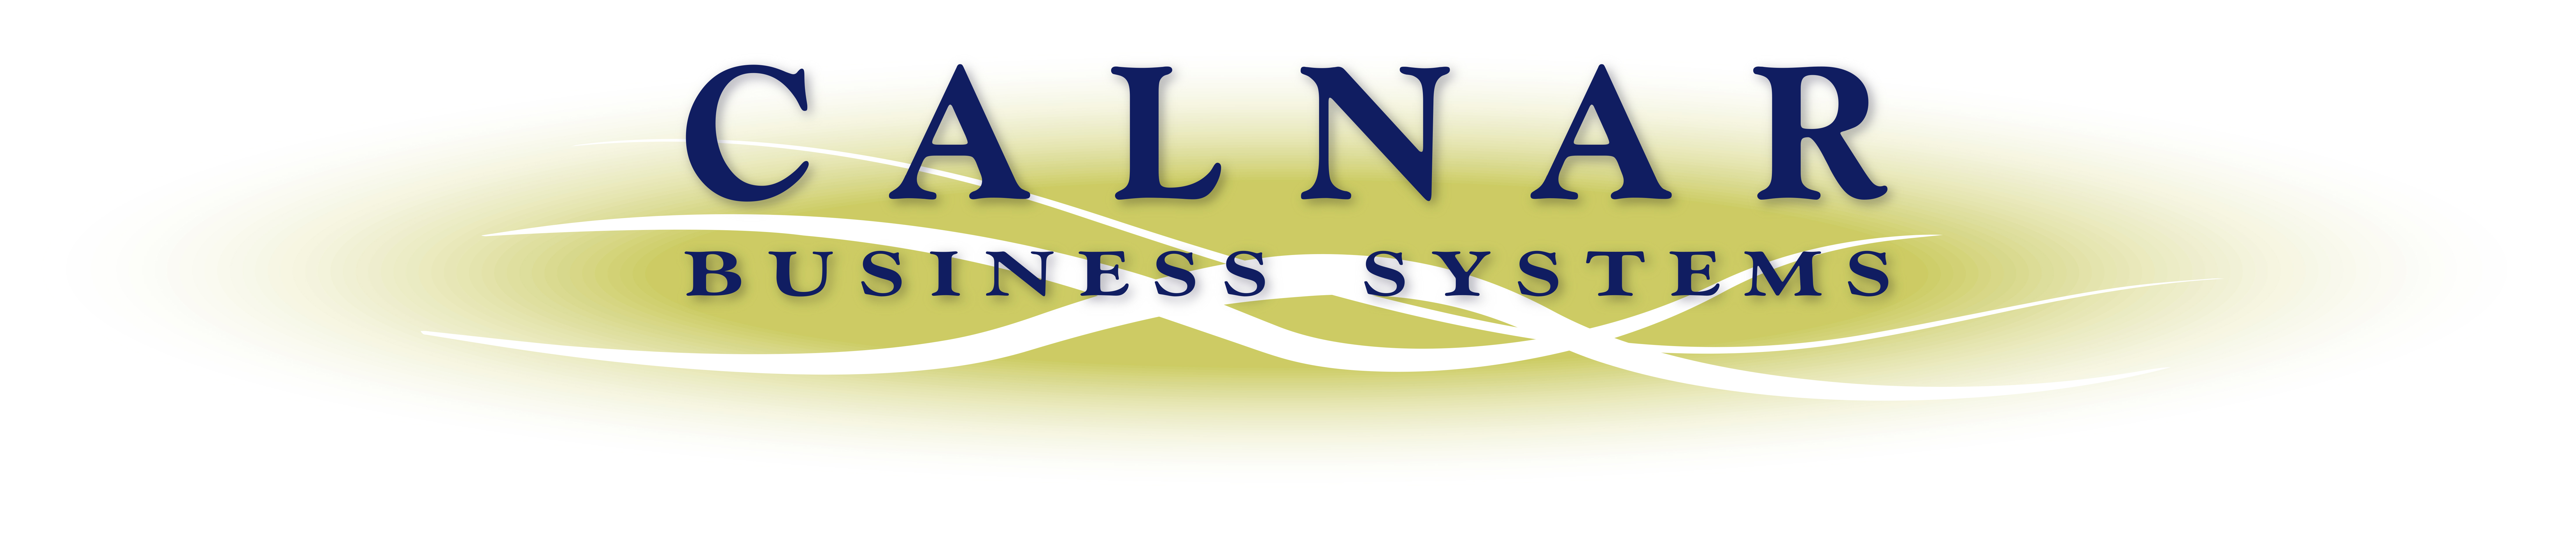 calnar business systems